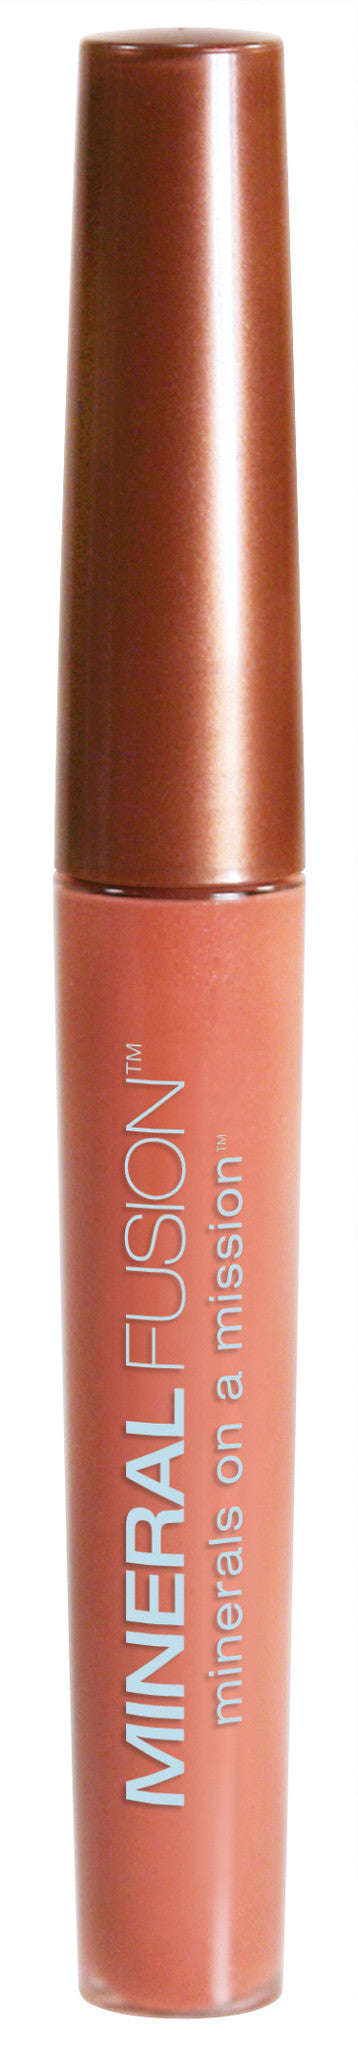 Mineral Fusion - Lip Gloss - Clarity (Rose Gold), 4ml